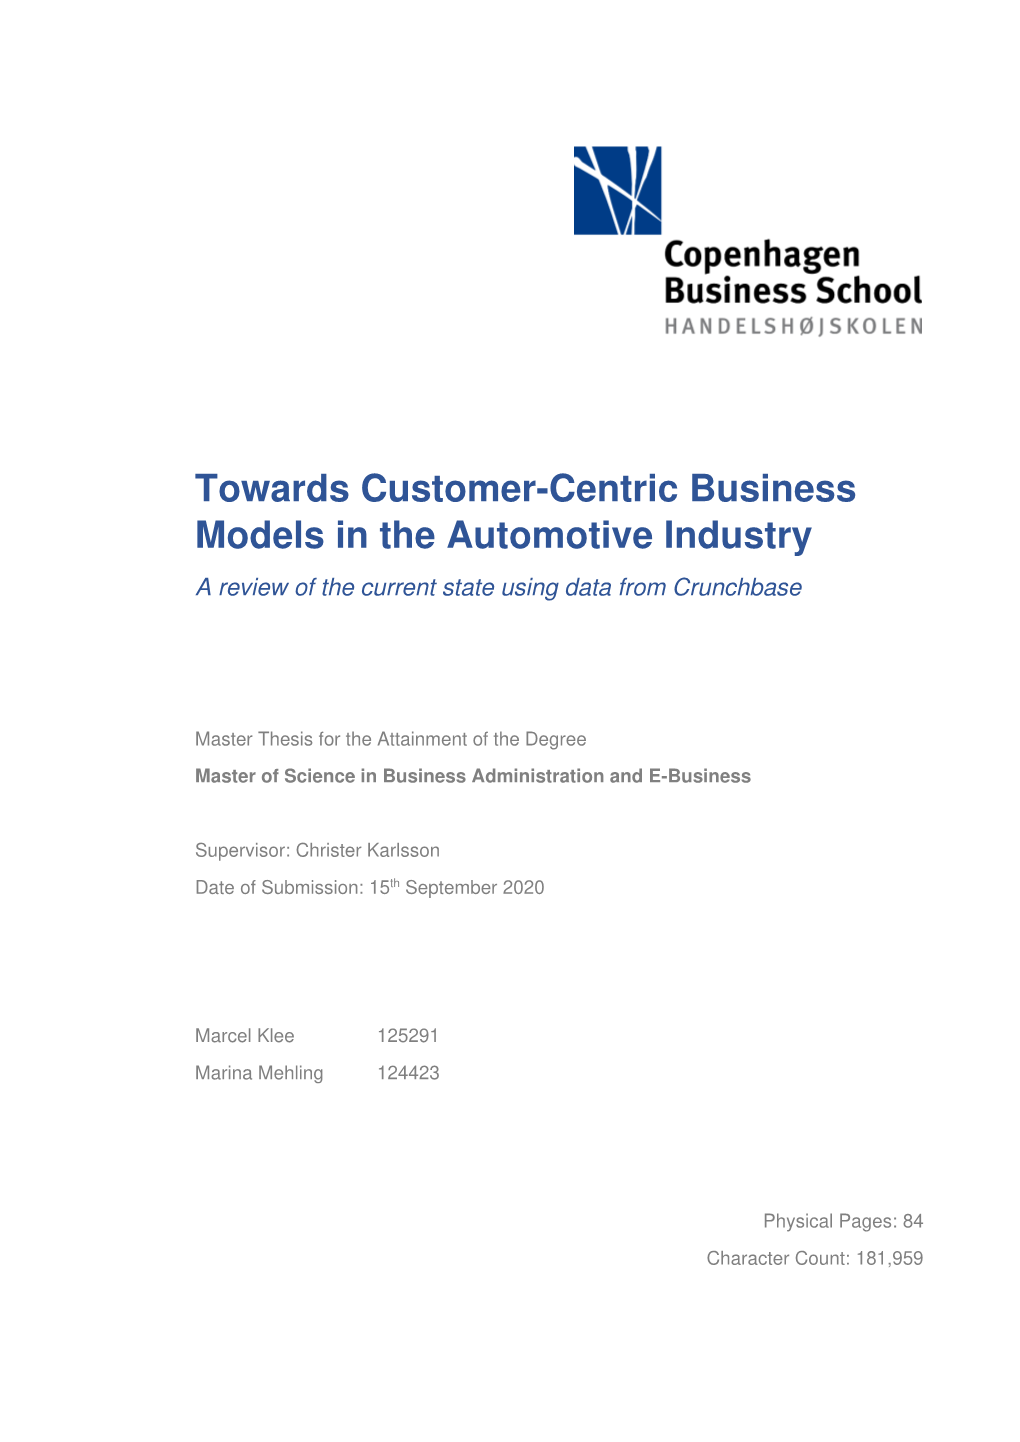 Towards Customer-Centric Business Models in the Automotive Industry a Review of the Current State Using Data from Crunchbase